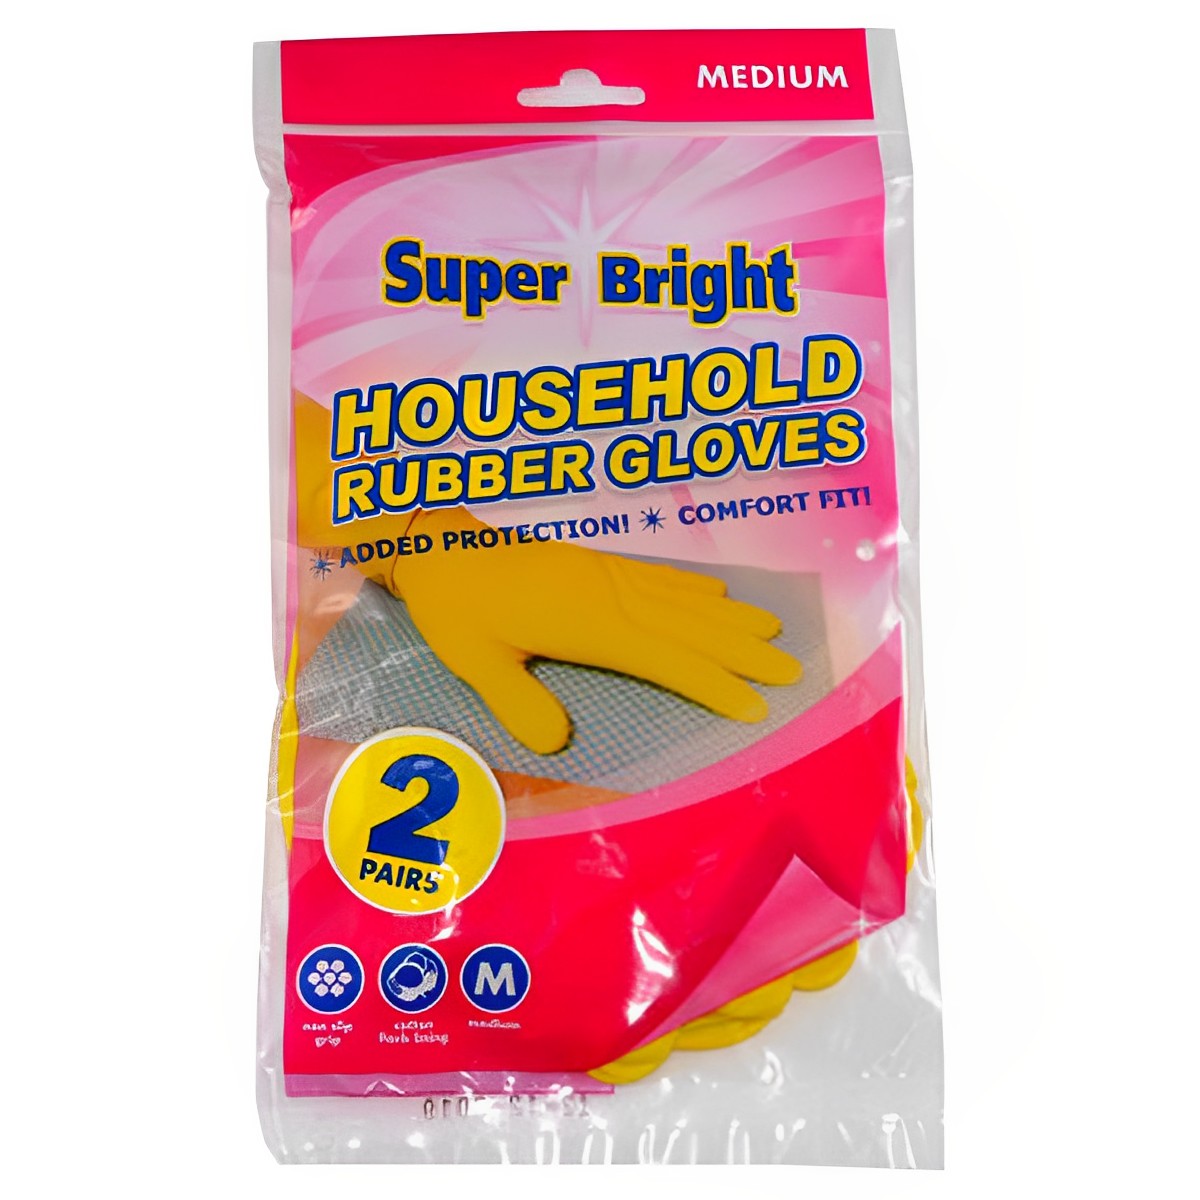 Super Bright - Rubber Gloves Medium - 2 pairs - Continental Food Store